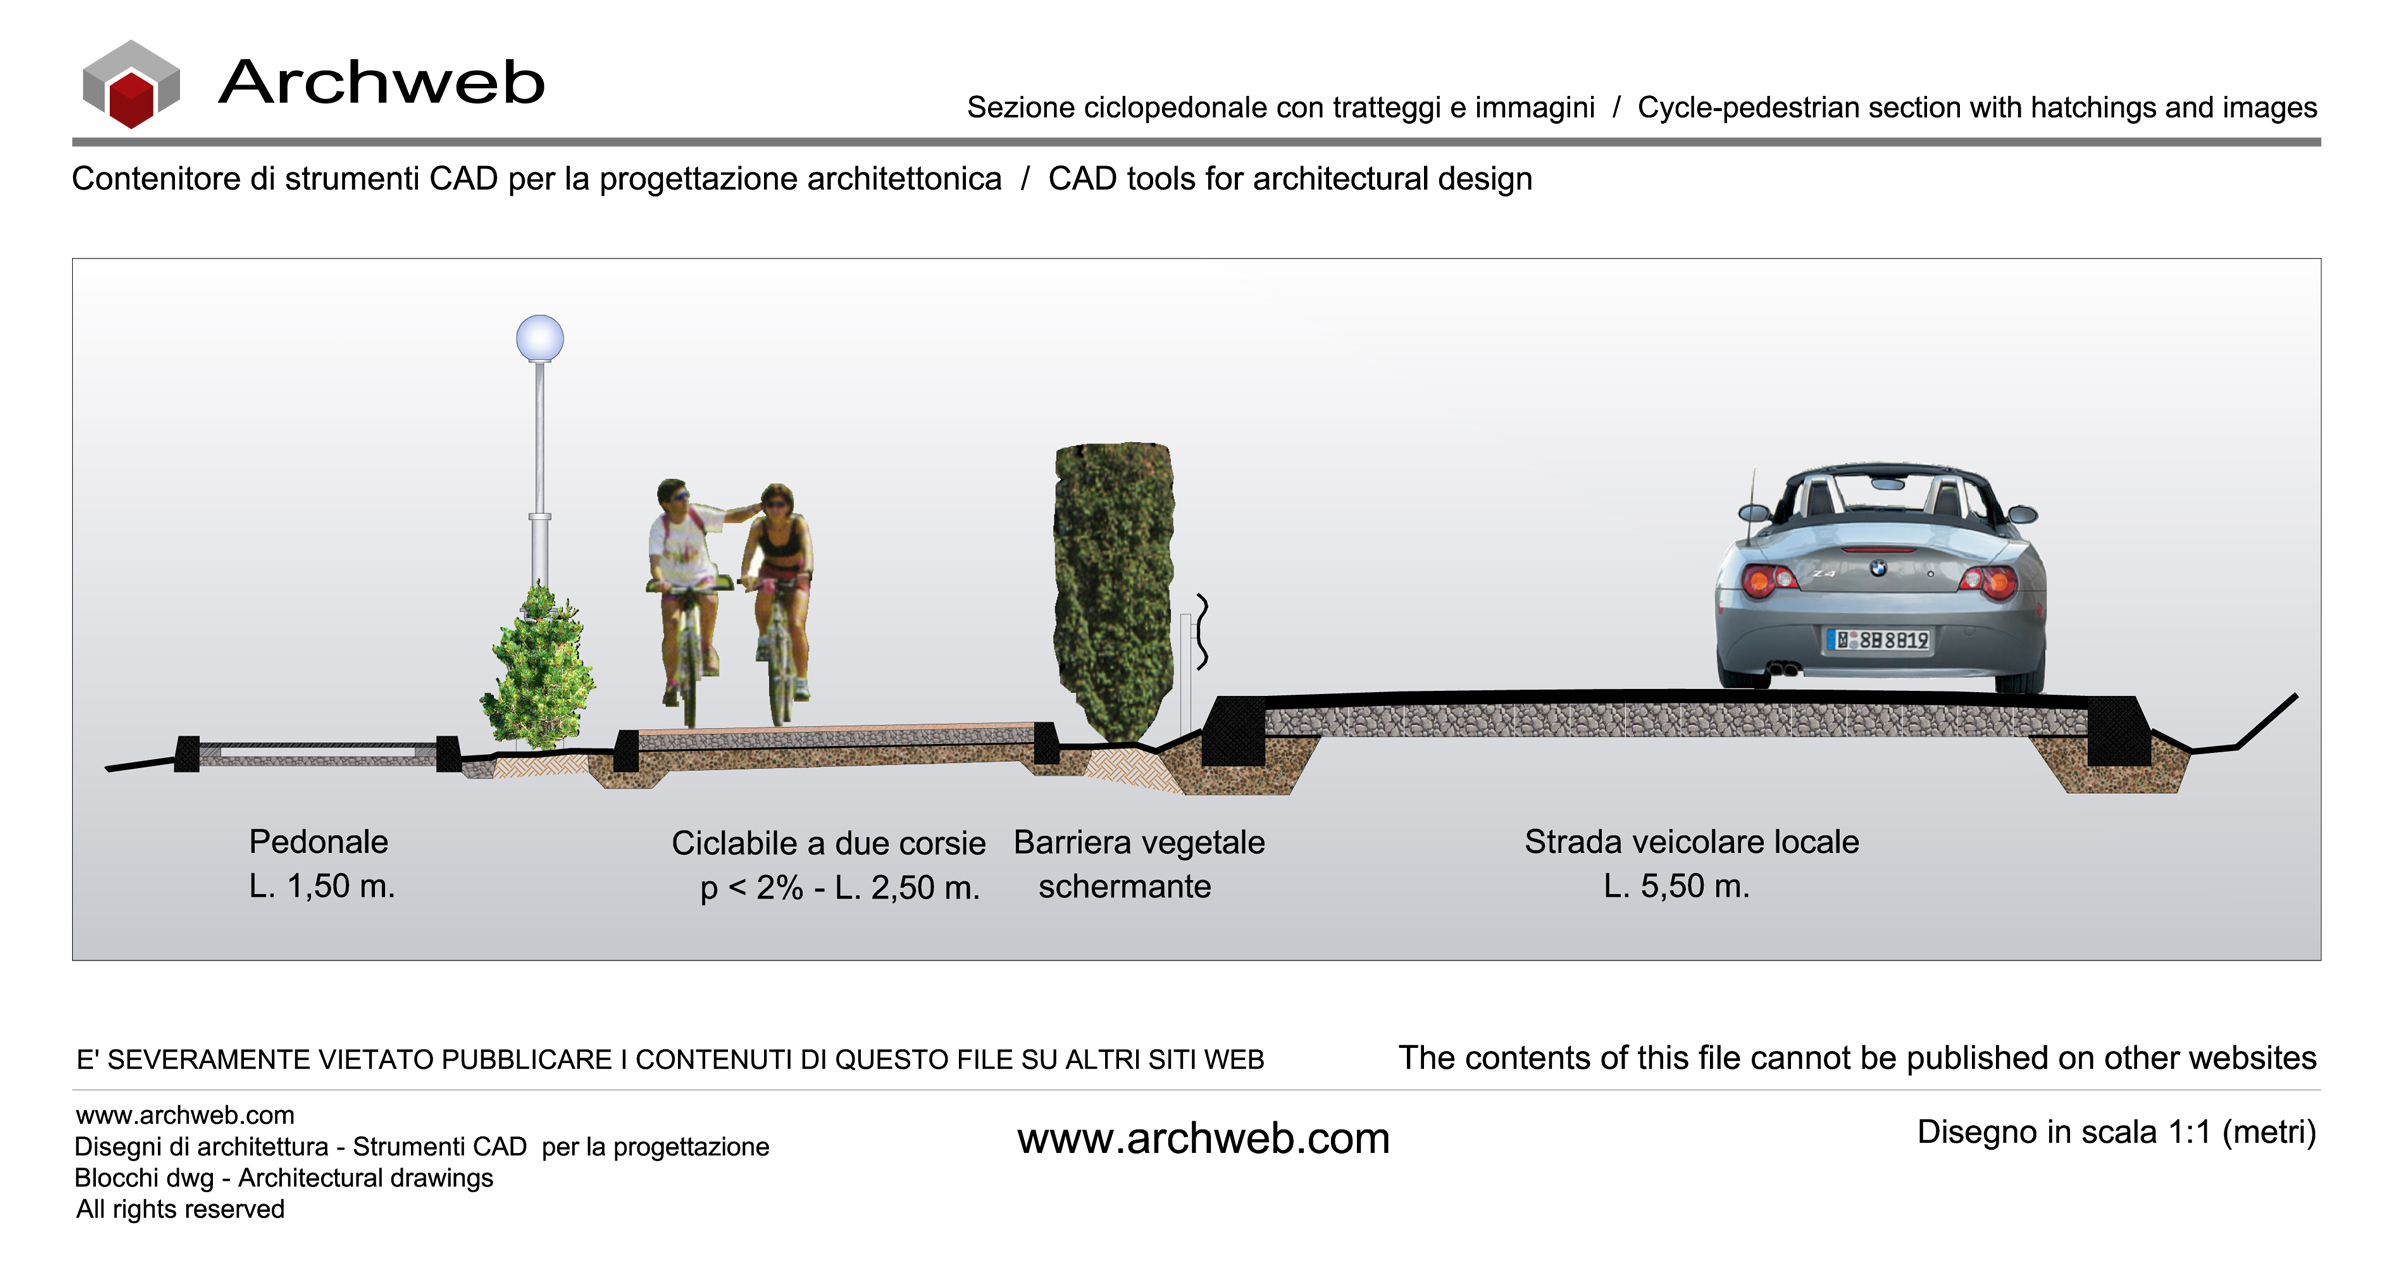 Cycle-pedestrian section with raster images and textures 02. 1:100 scale drawing - Archweb cad block